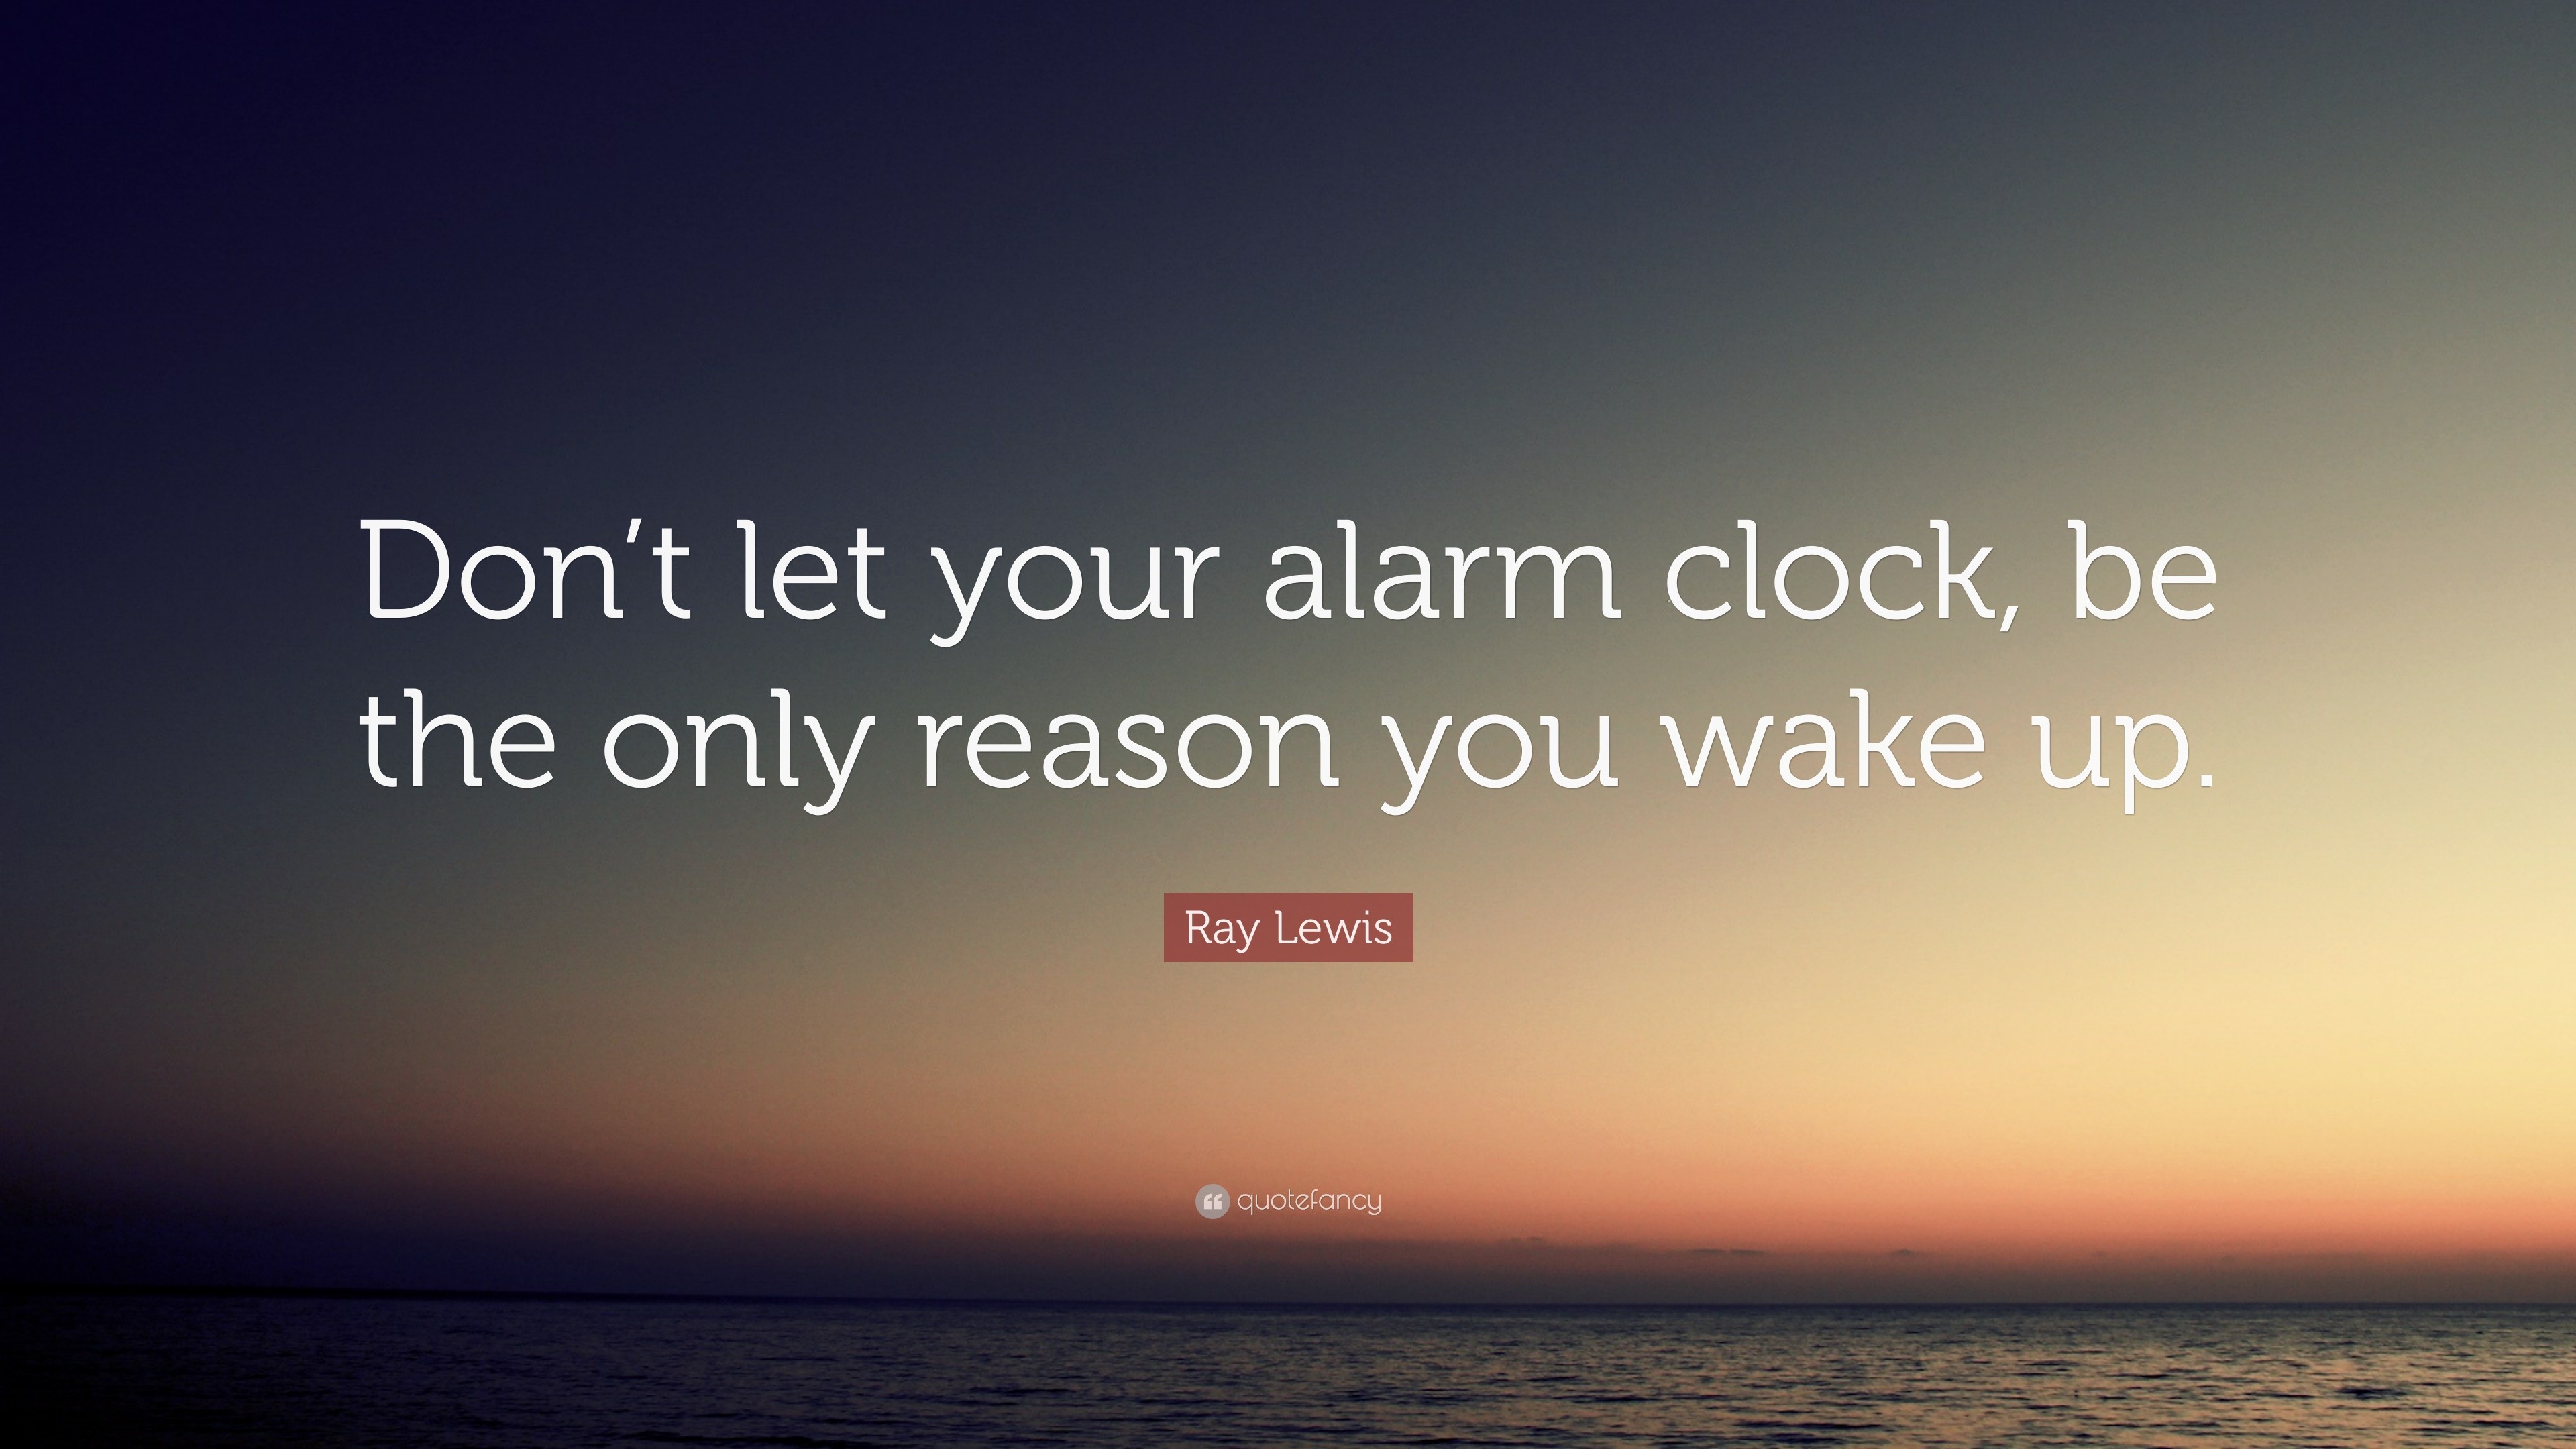 Ray Lewis Quote: “Don’t let your alarm clock, be the only reason you